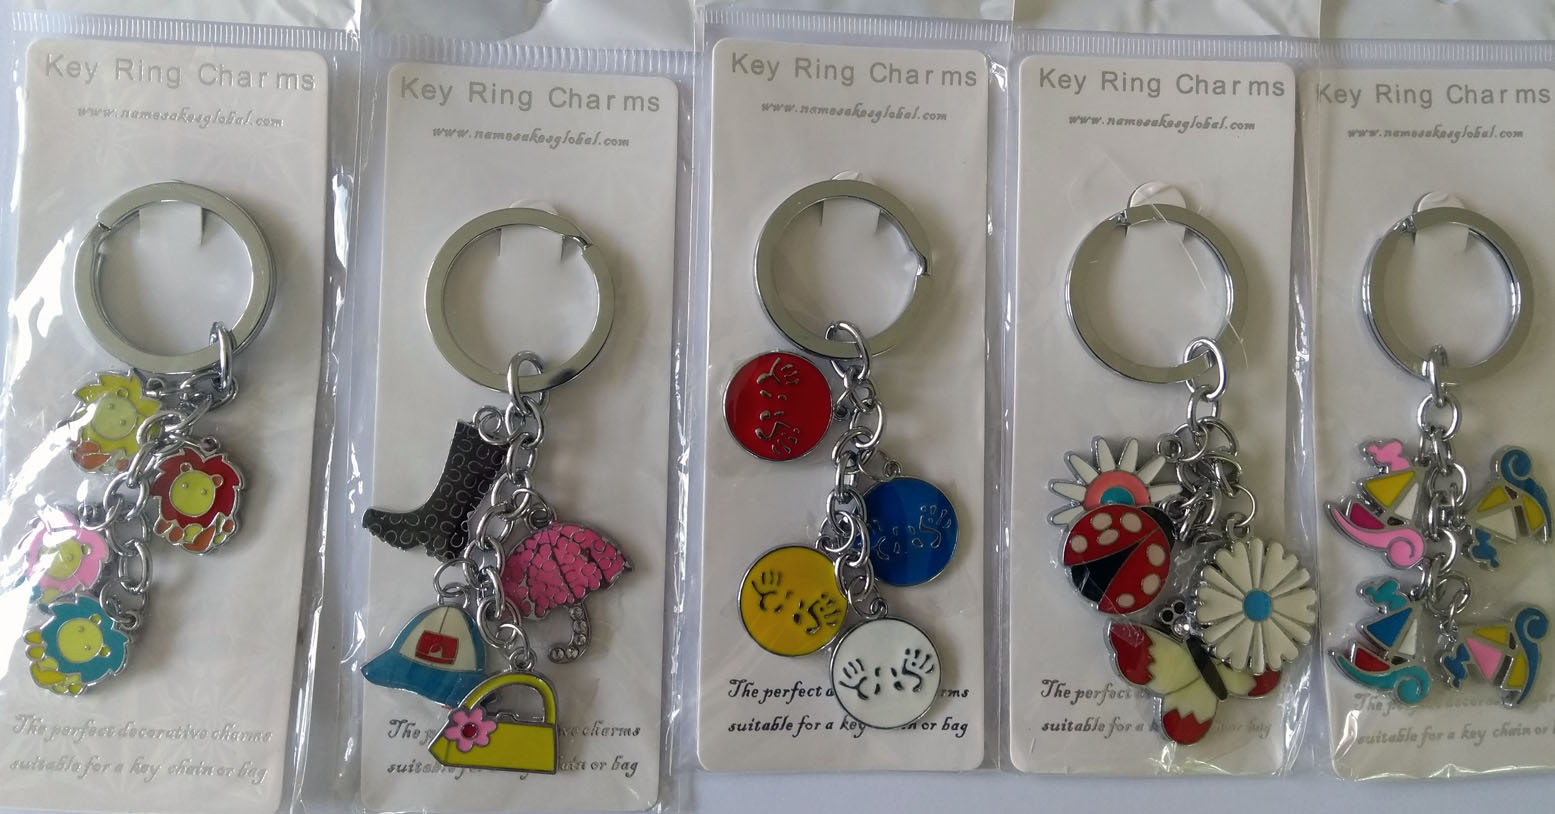 Set of Five Metal Key Rings with Charm Decorations (Set 4)